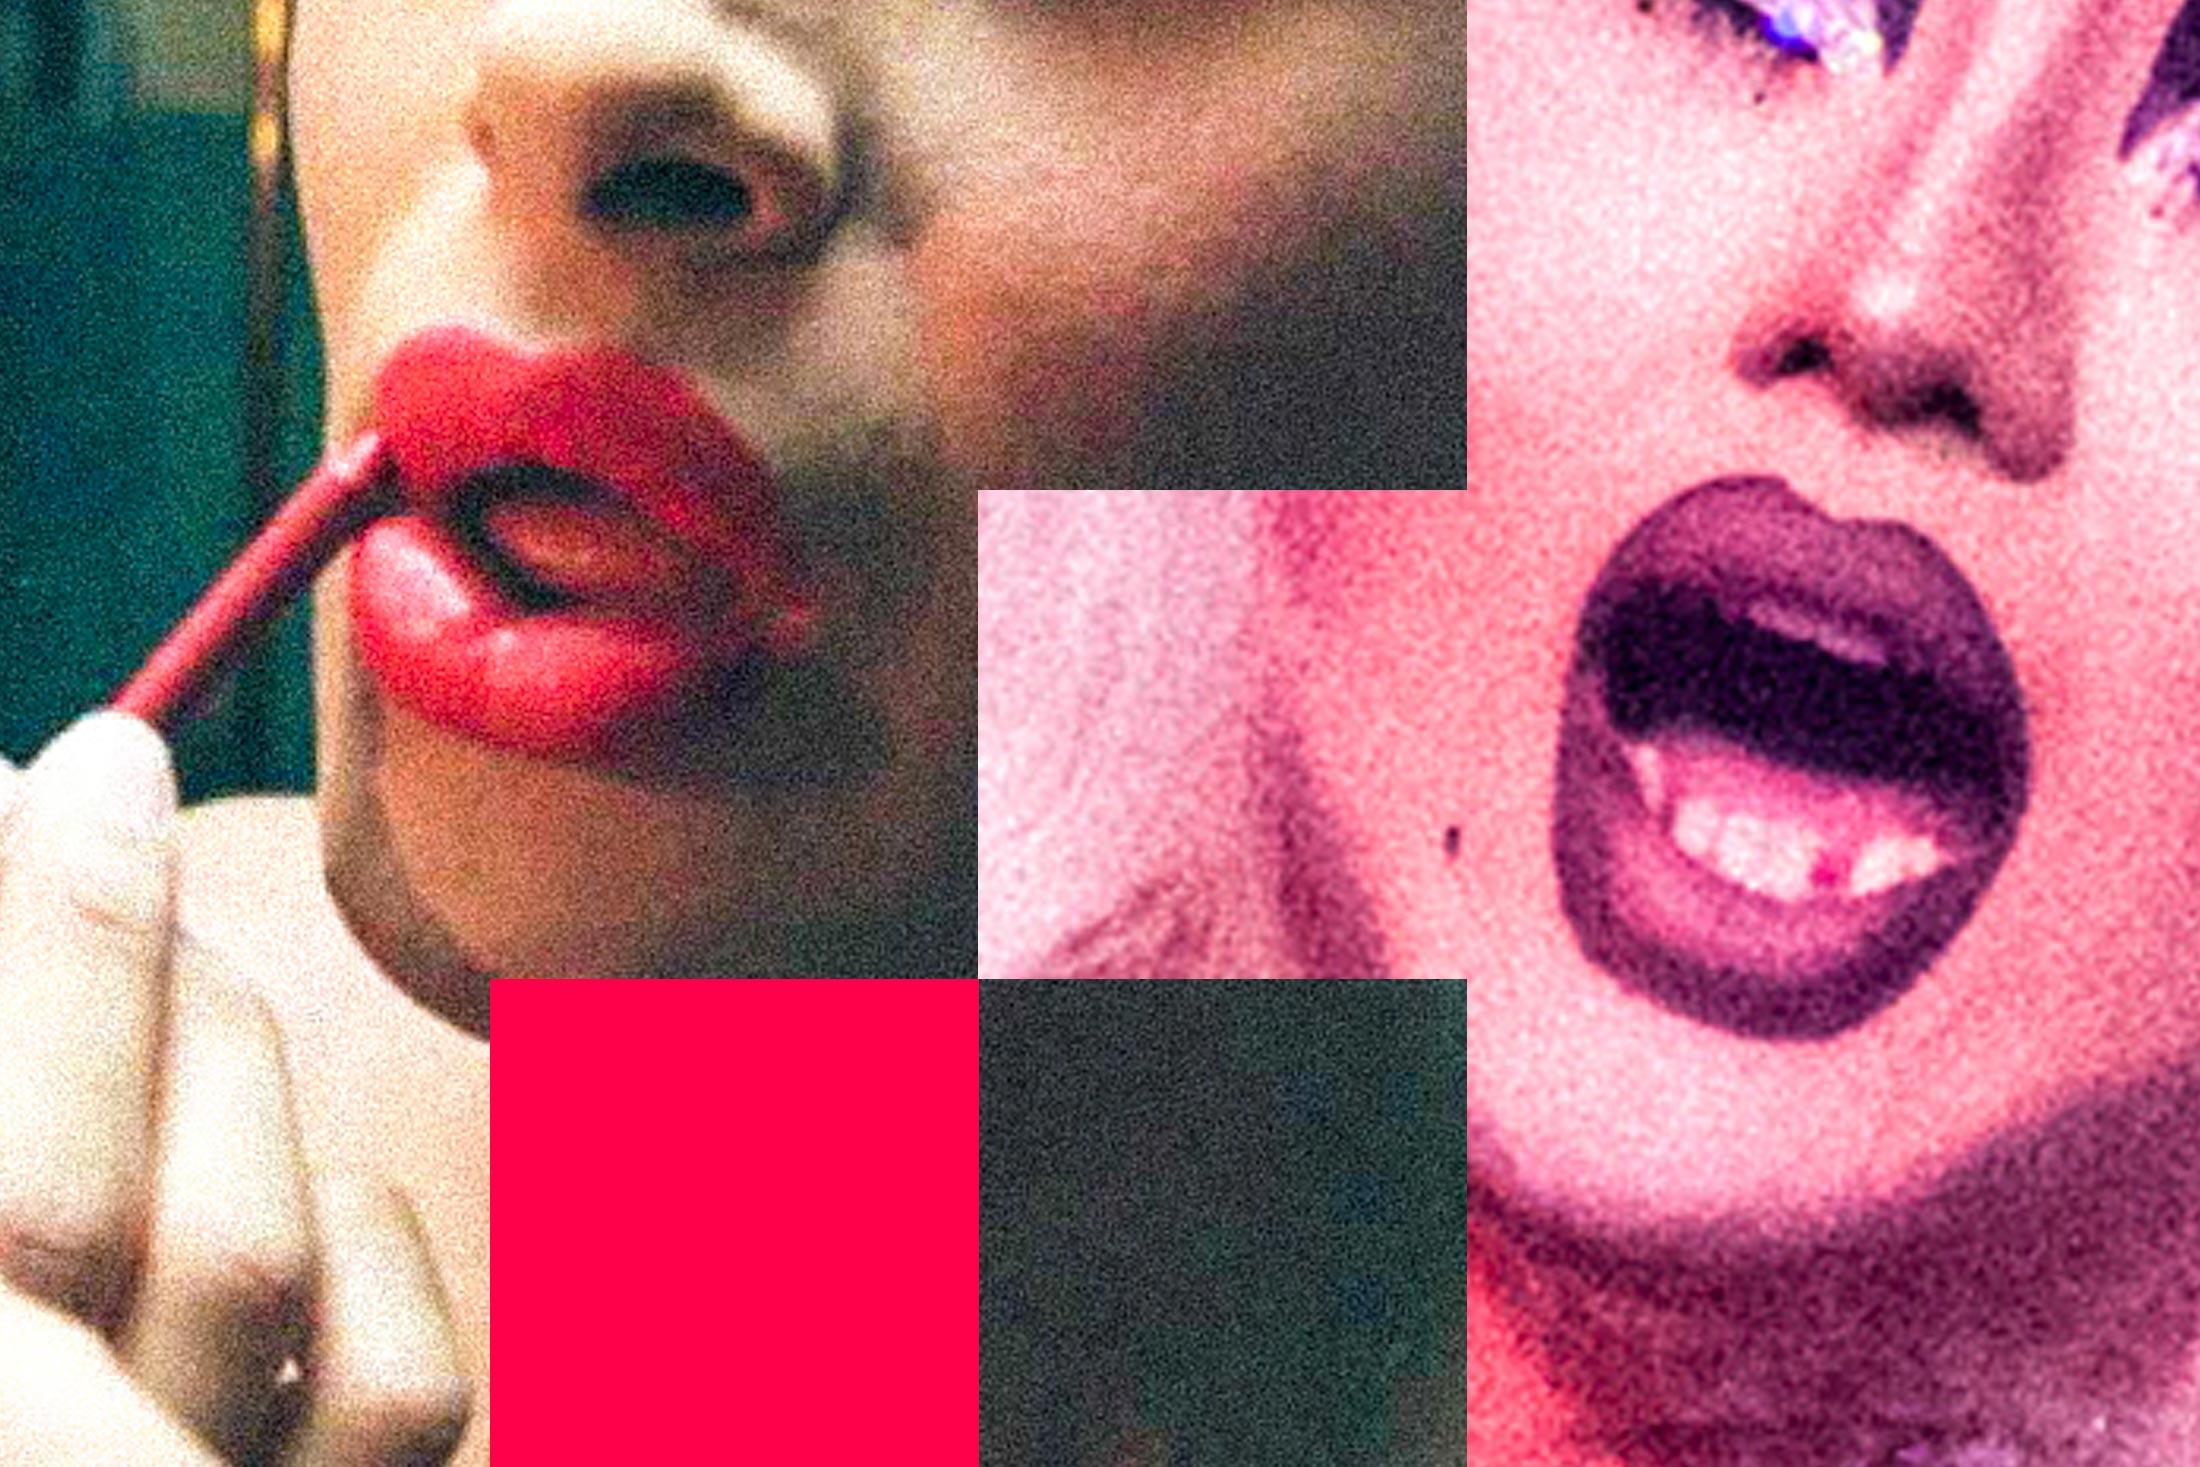 Close-up photos of two drag queen lips, one from the early '90s and another from 2016.